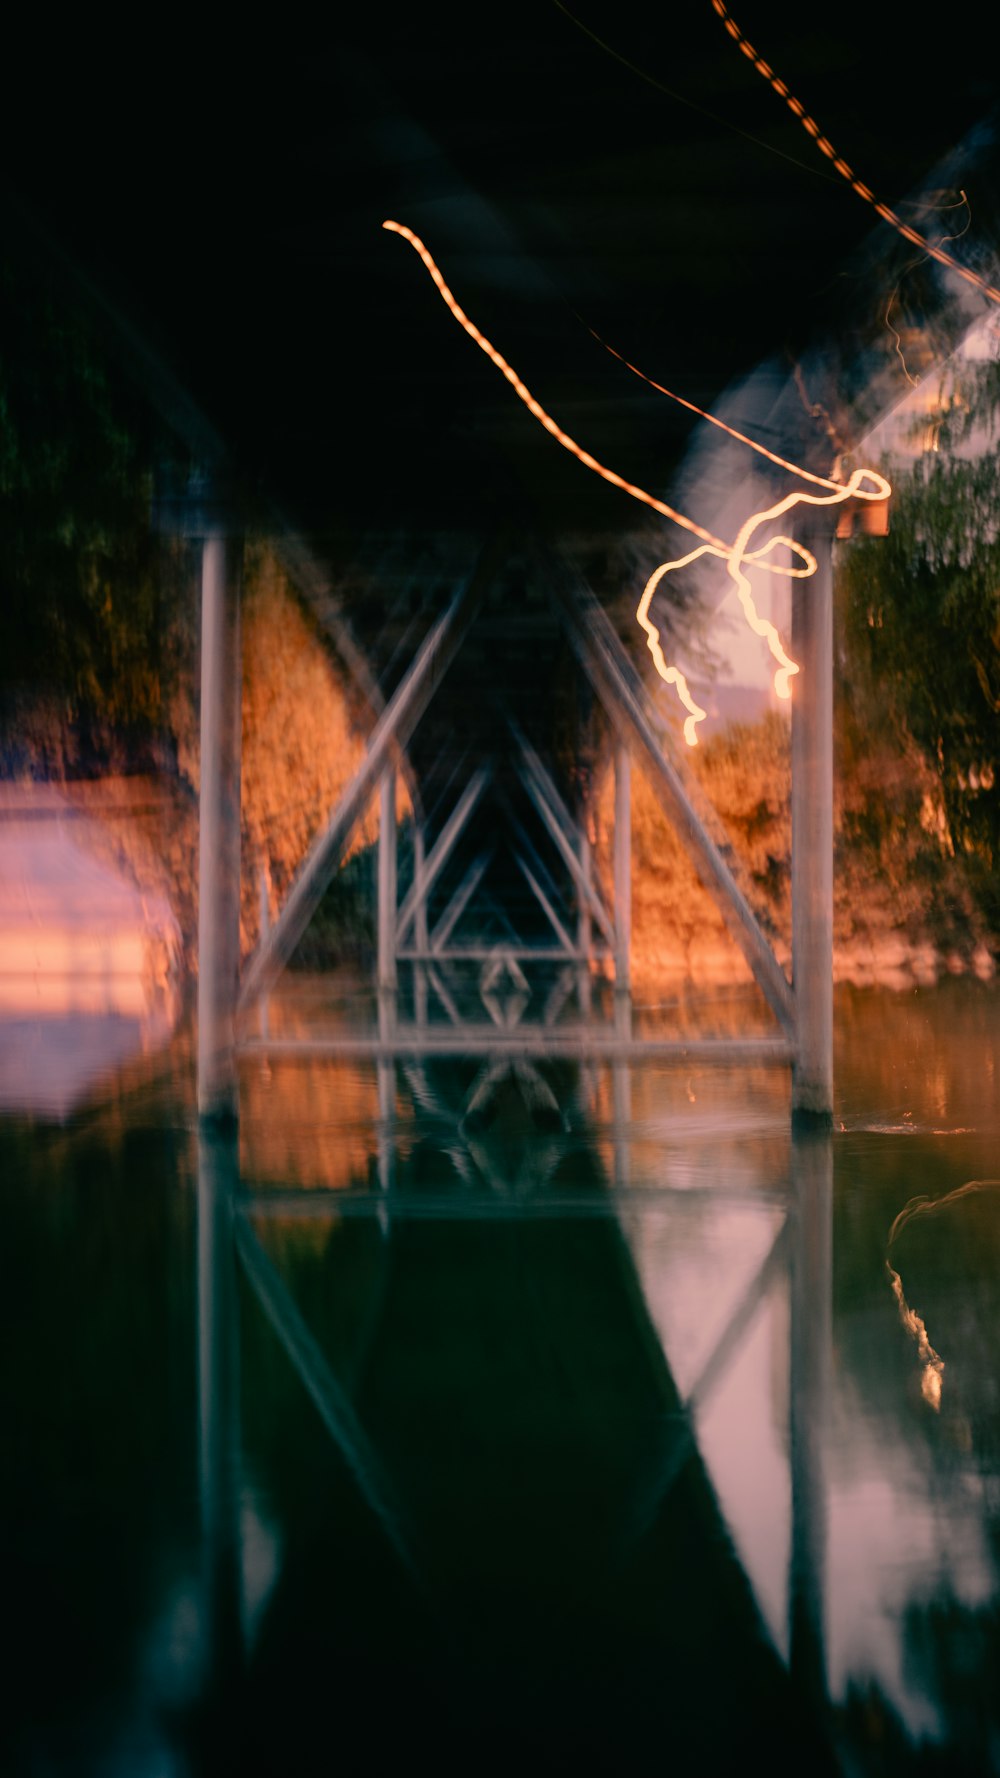 a blurry photo of a bridge over a body of water